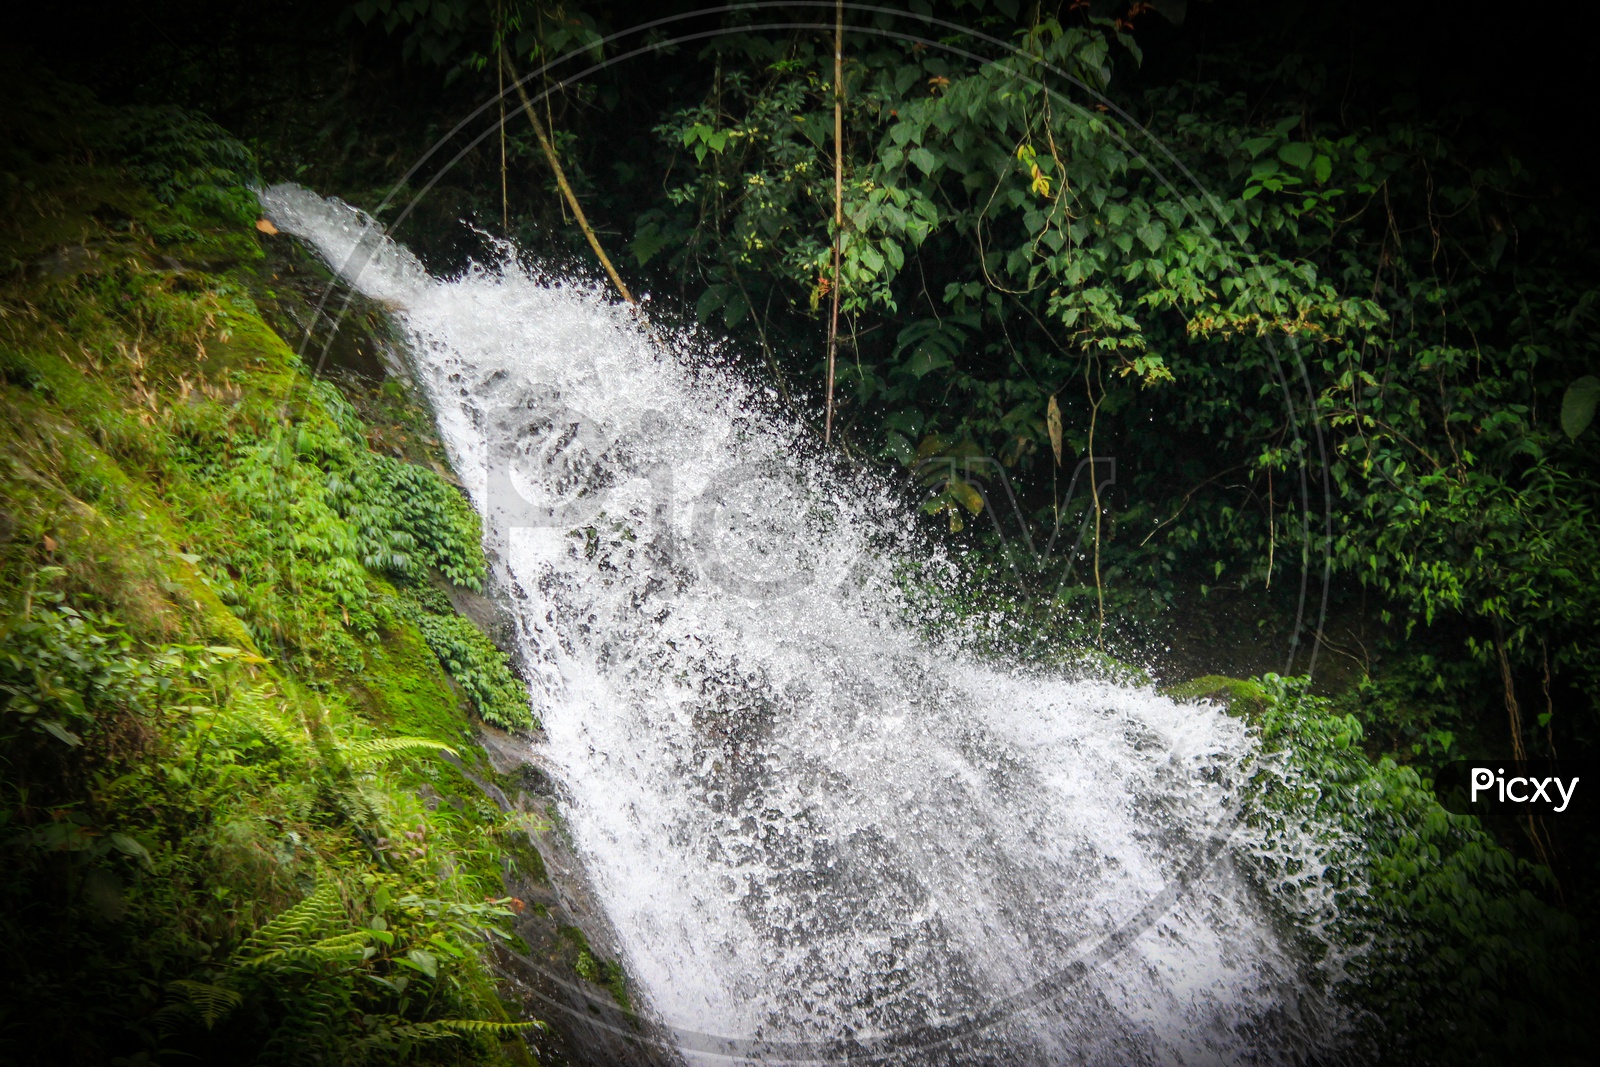 A Natural Waterfall In Hills Of Sikkim, India In Between Forest Vegetation